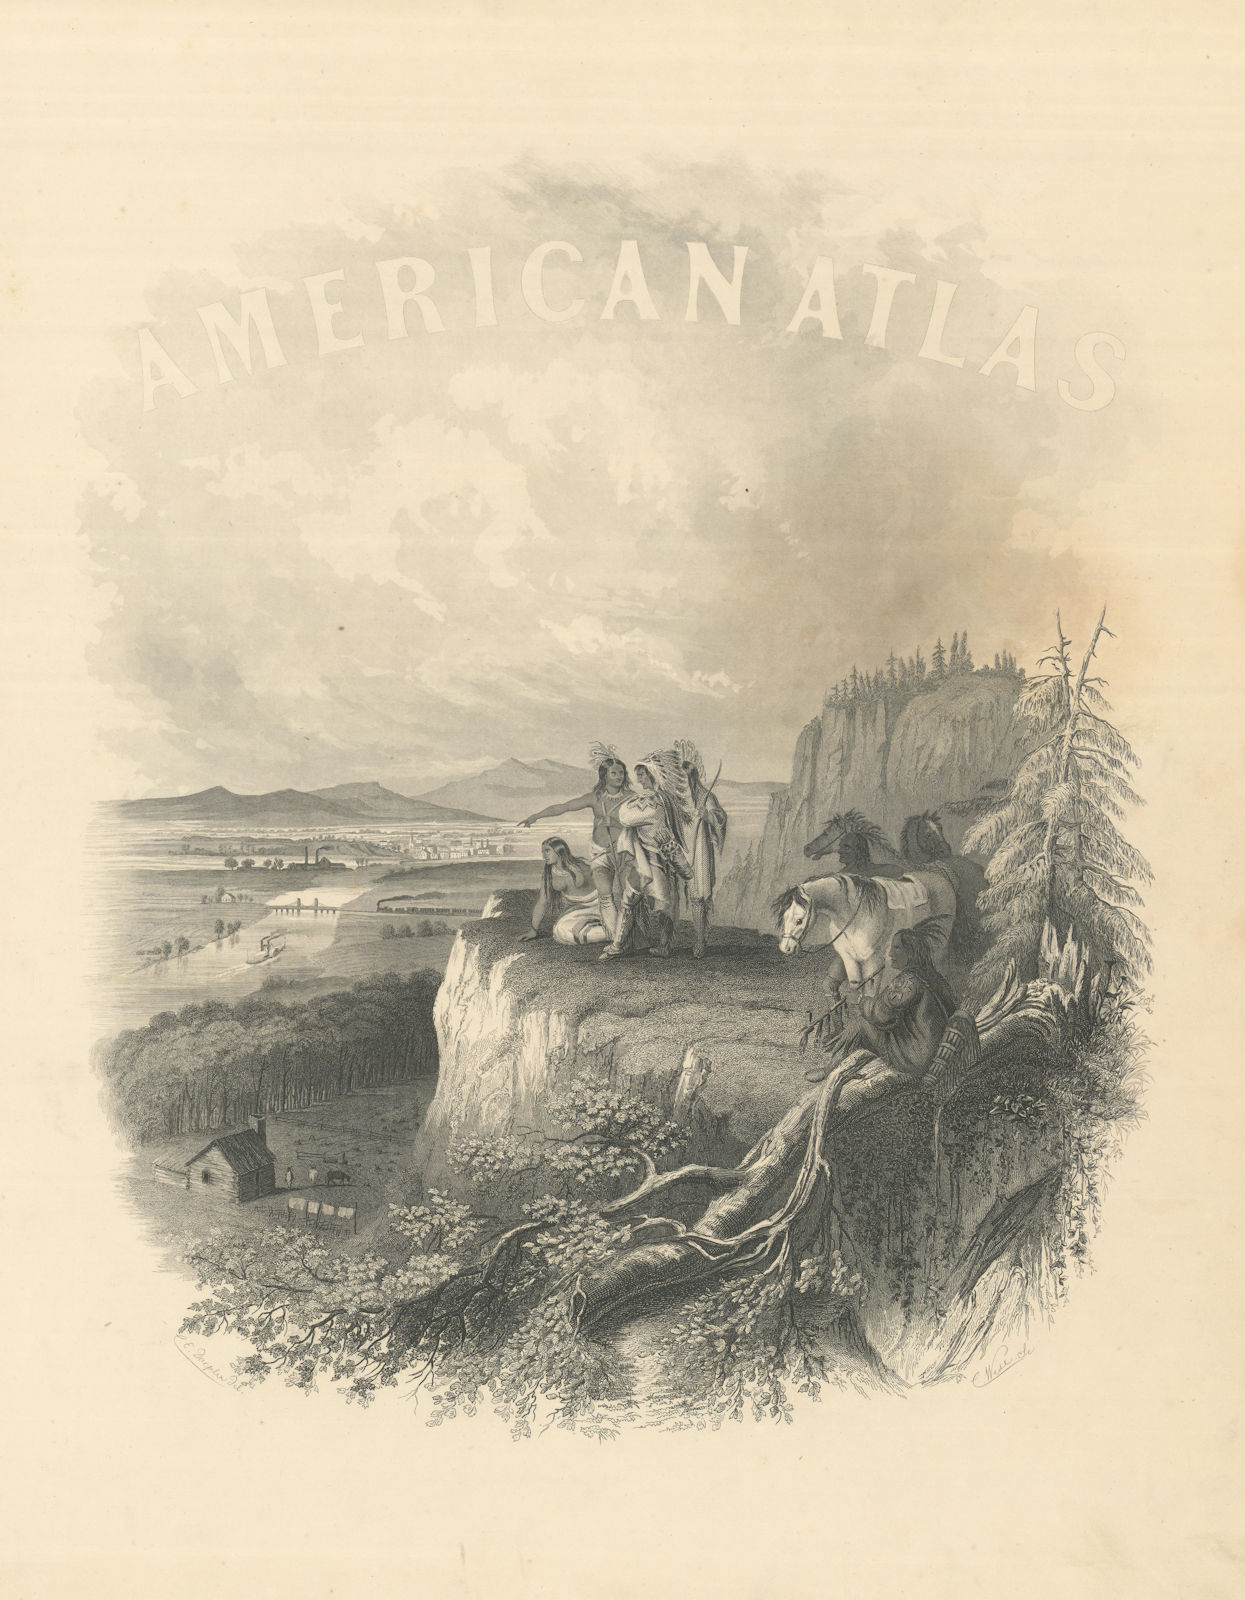 Johnson's Family Atlas title page. "American Atlas". Native Indians 1861 print